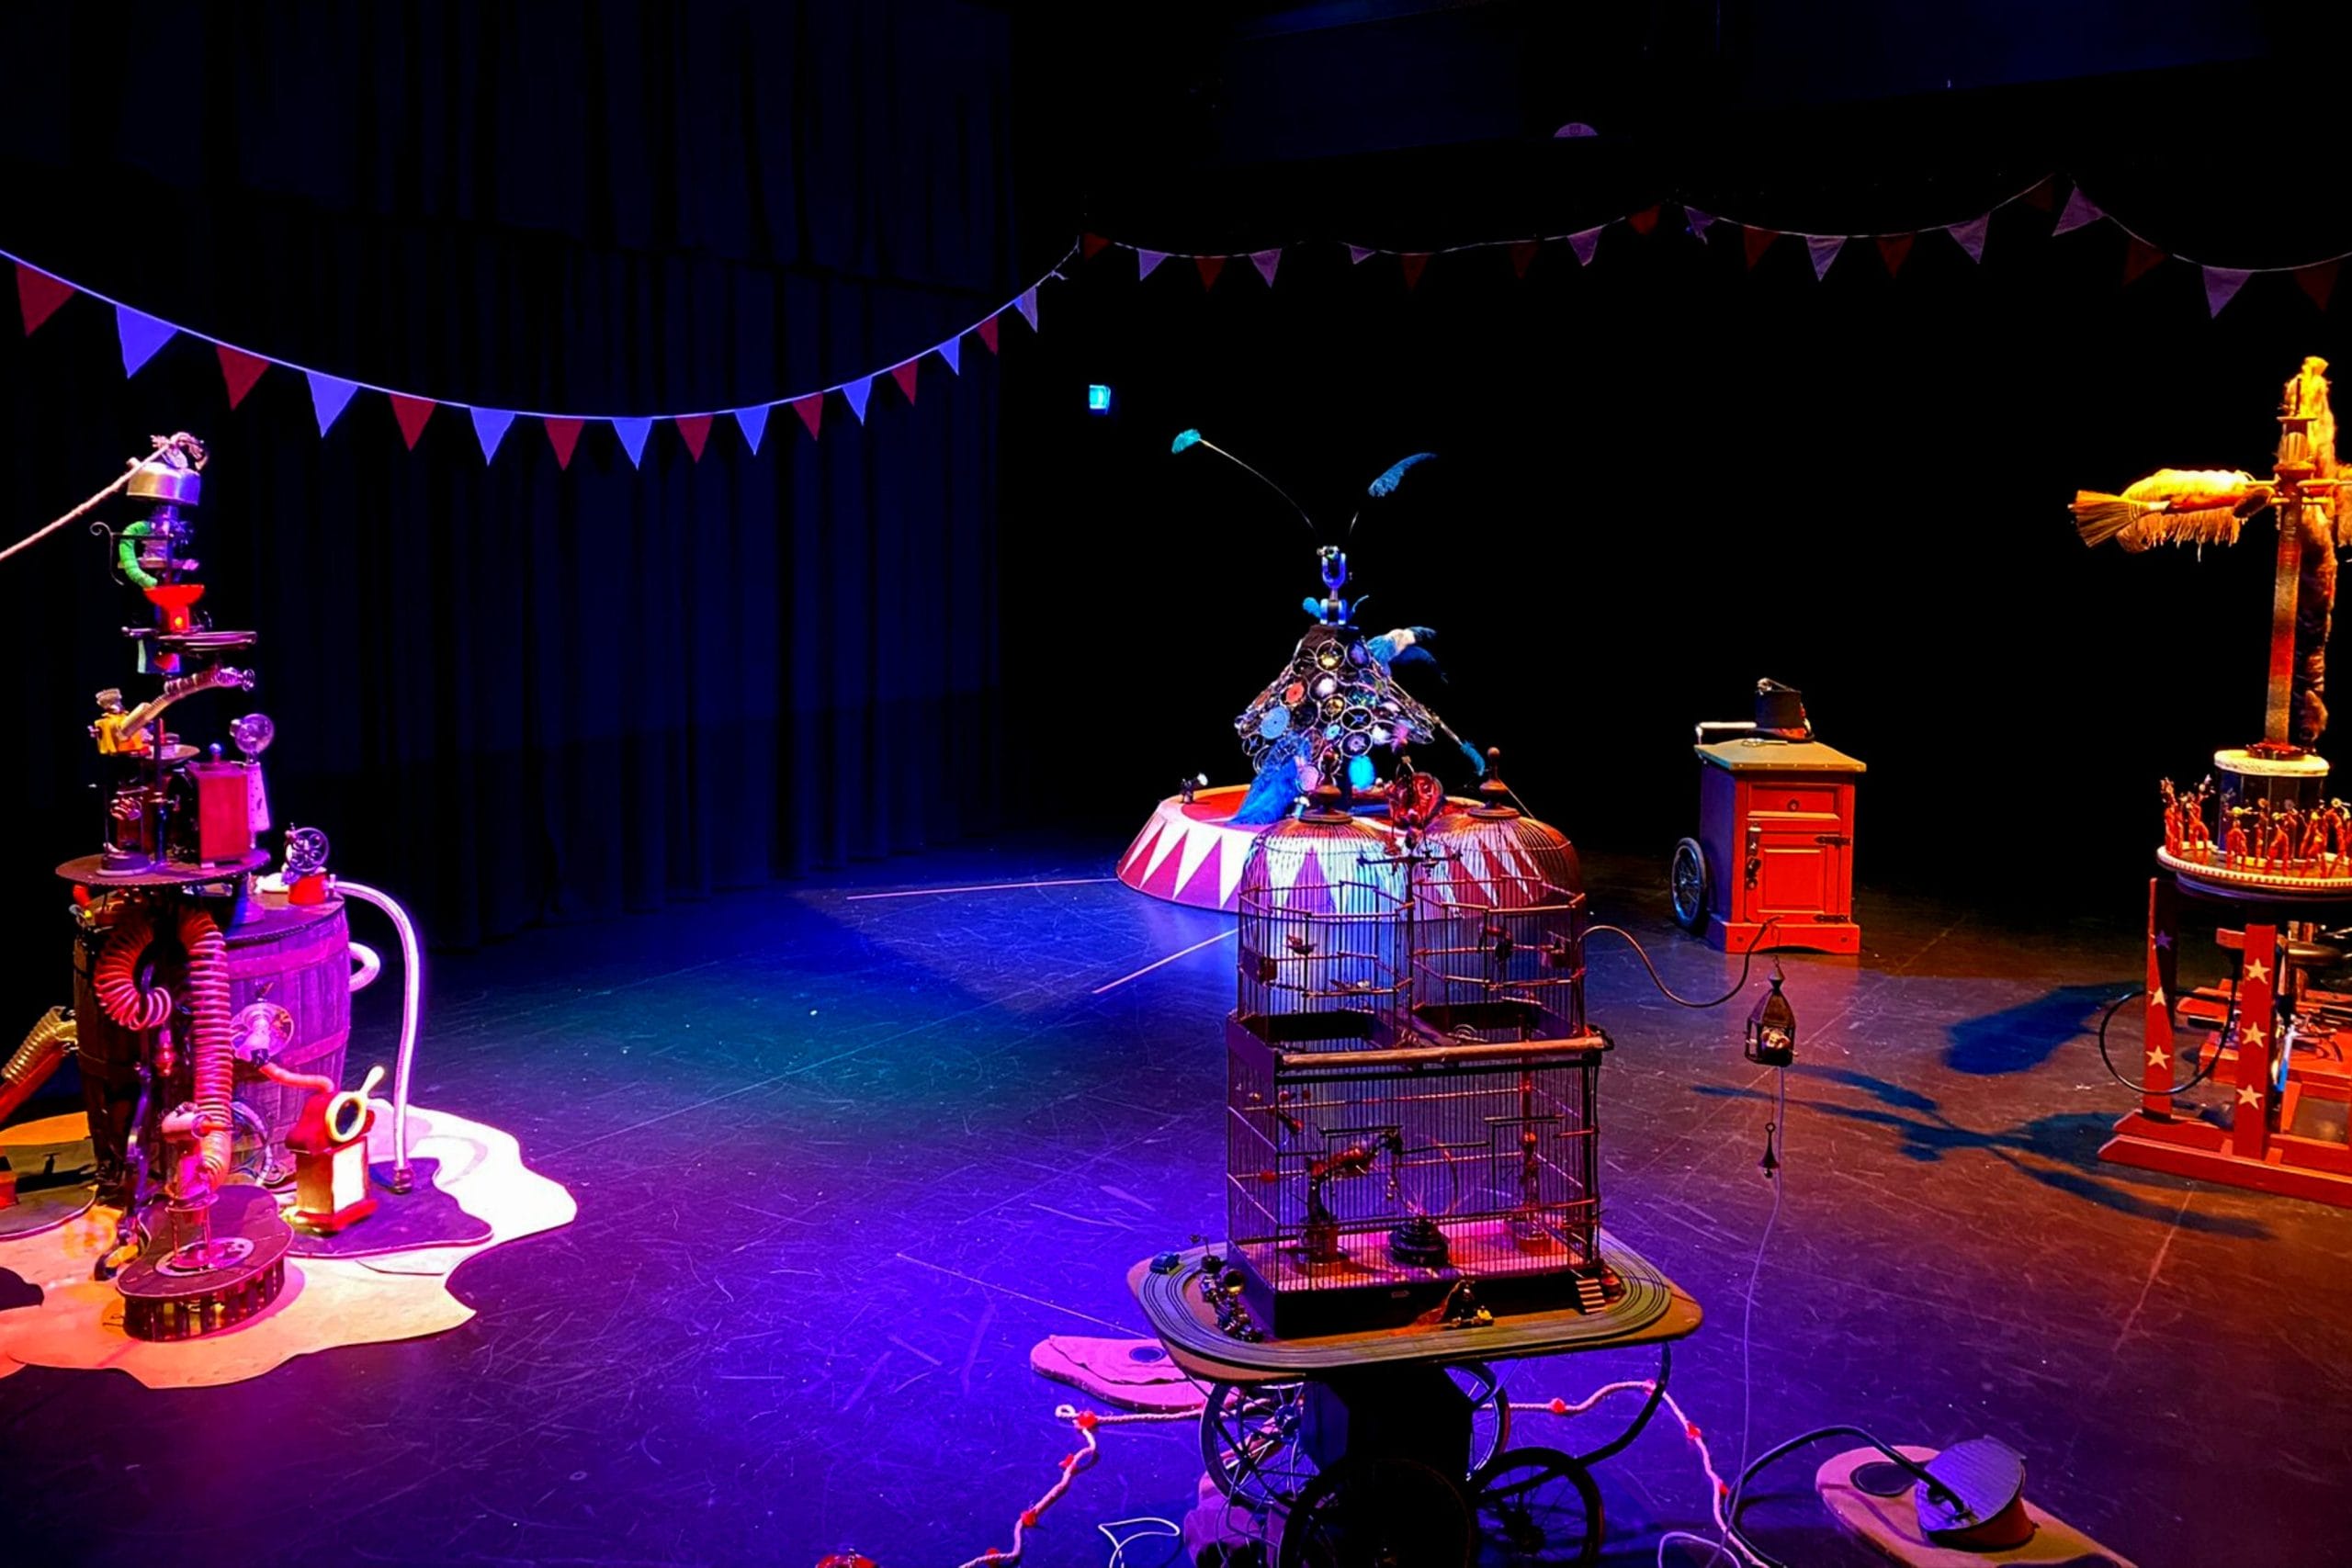 A room filled with contraptions made to look like a circus